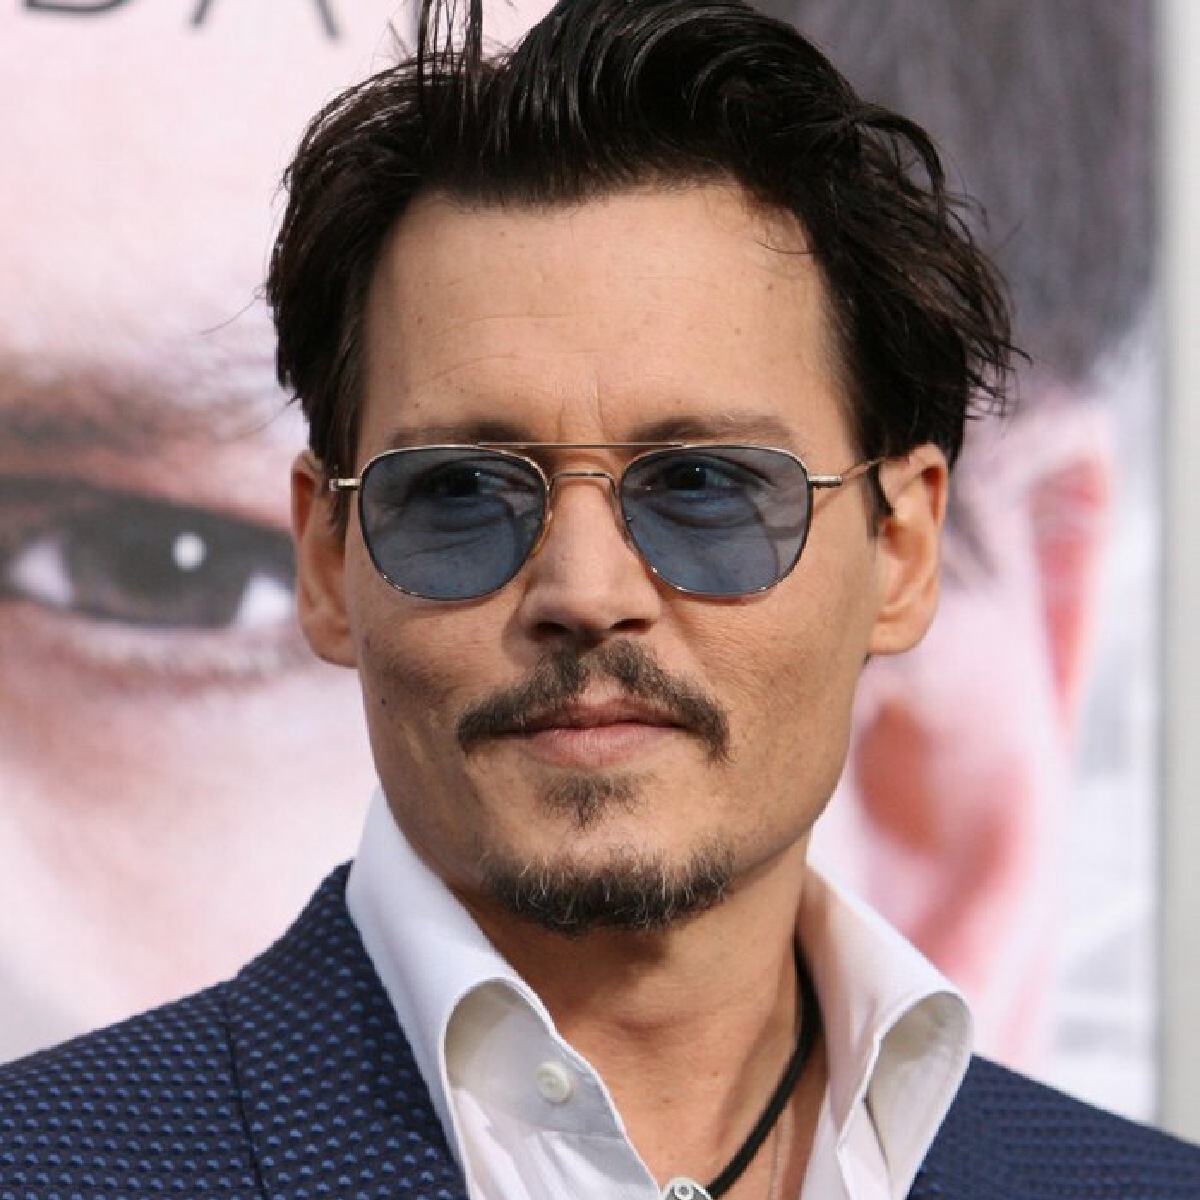 Depp at the event